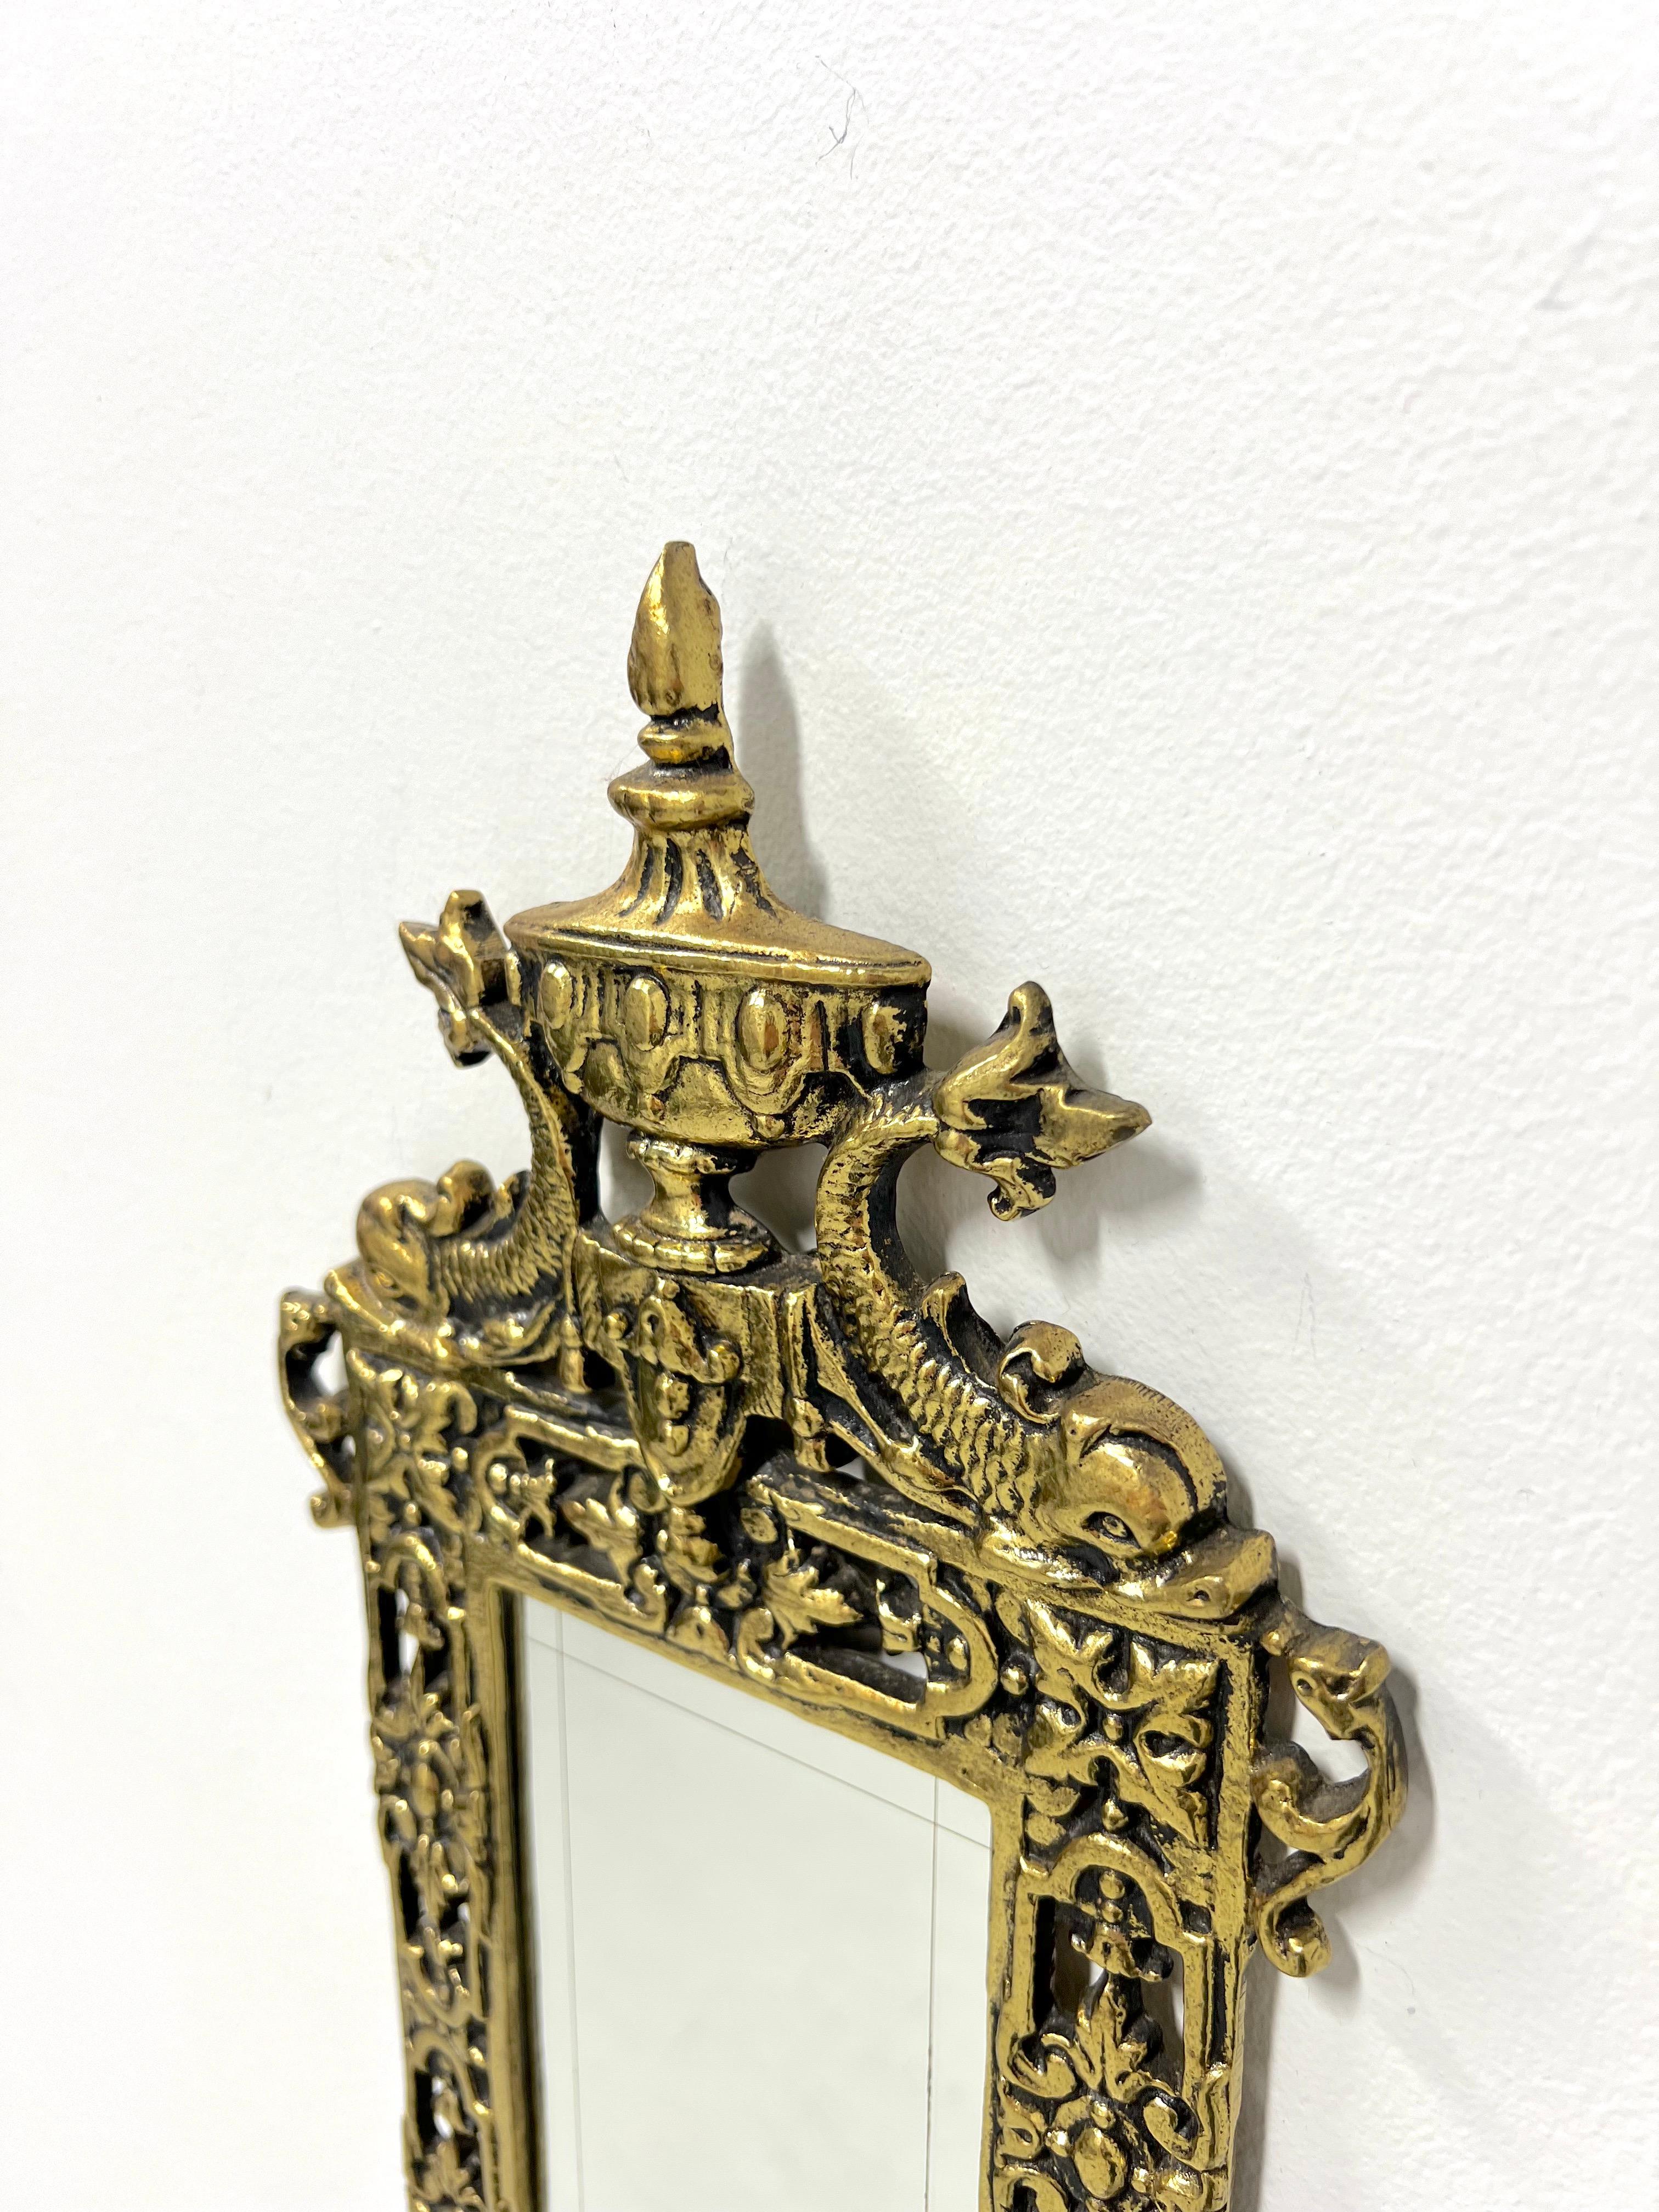 American Mid 20th Century Solid Brass French Provincial Dolphin Candle Sconce For Sale